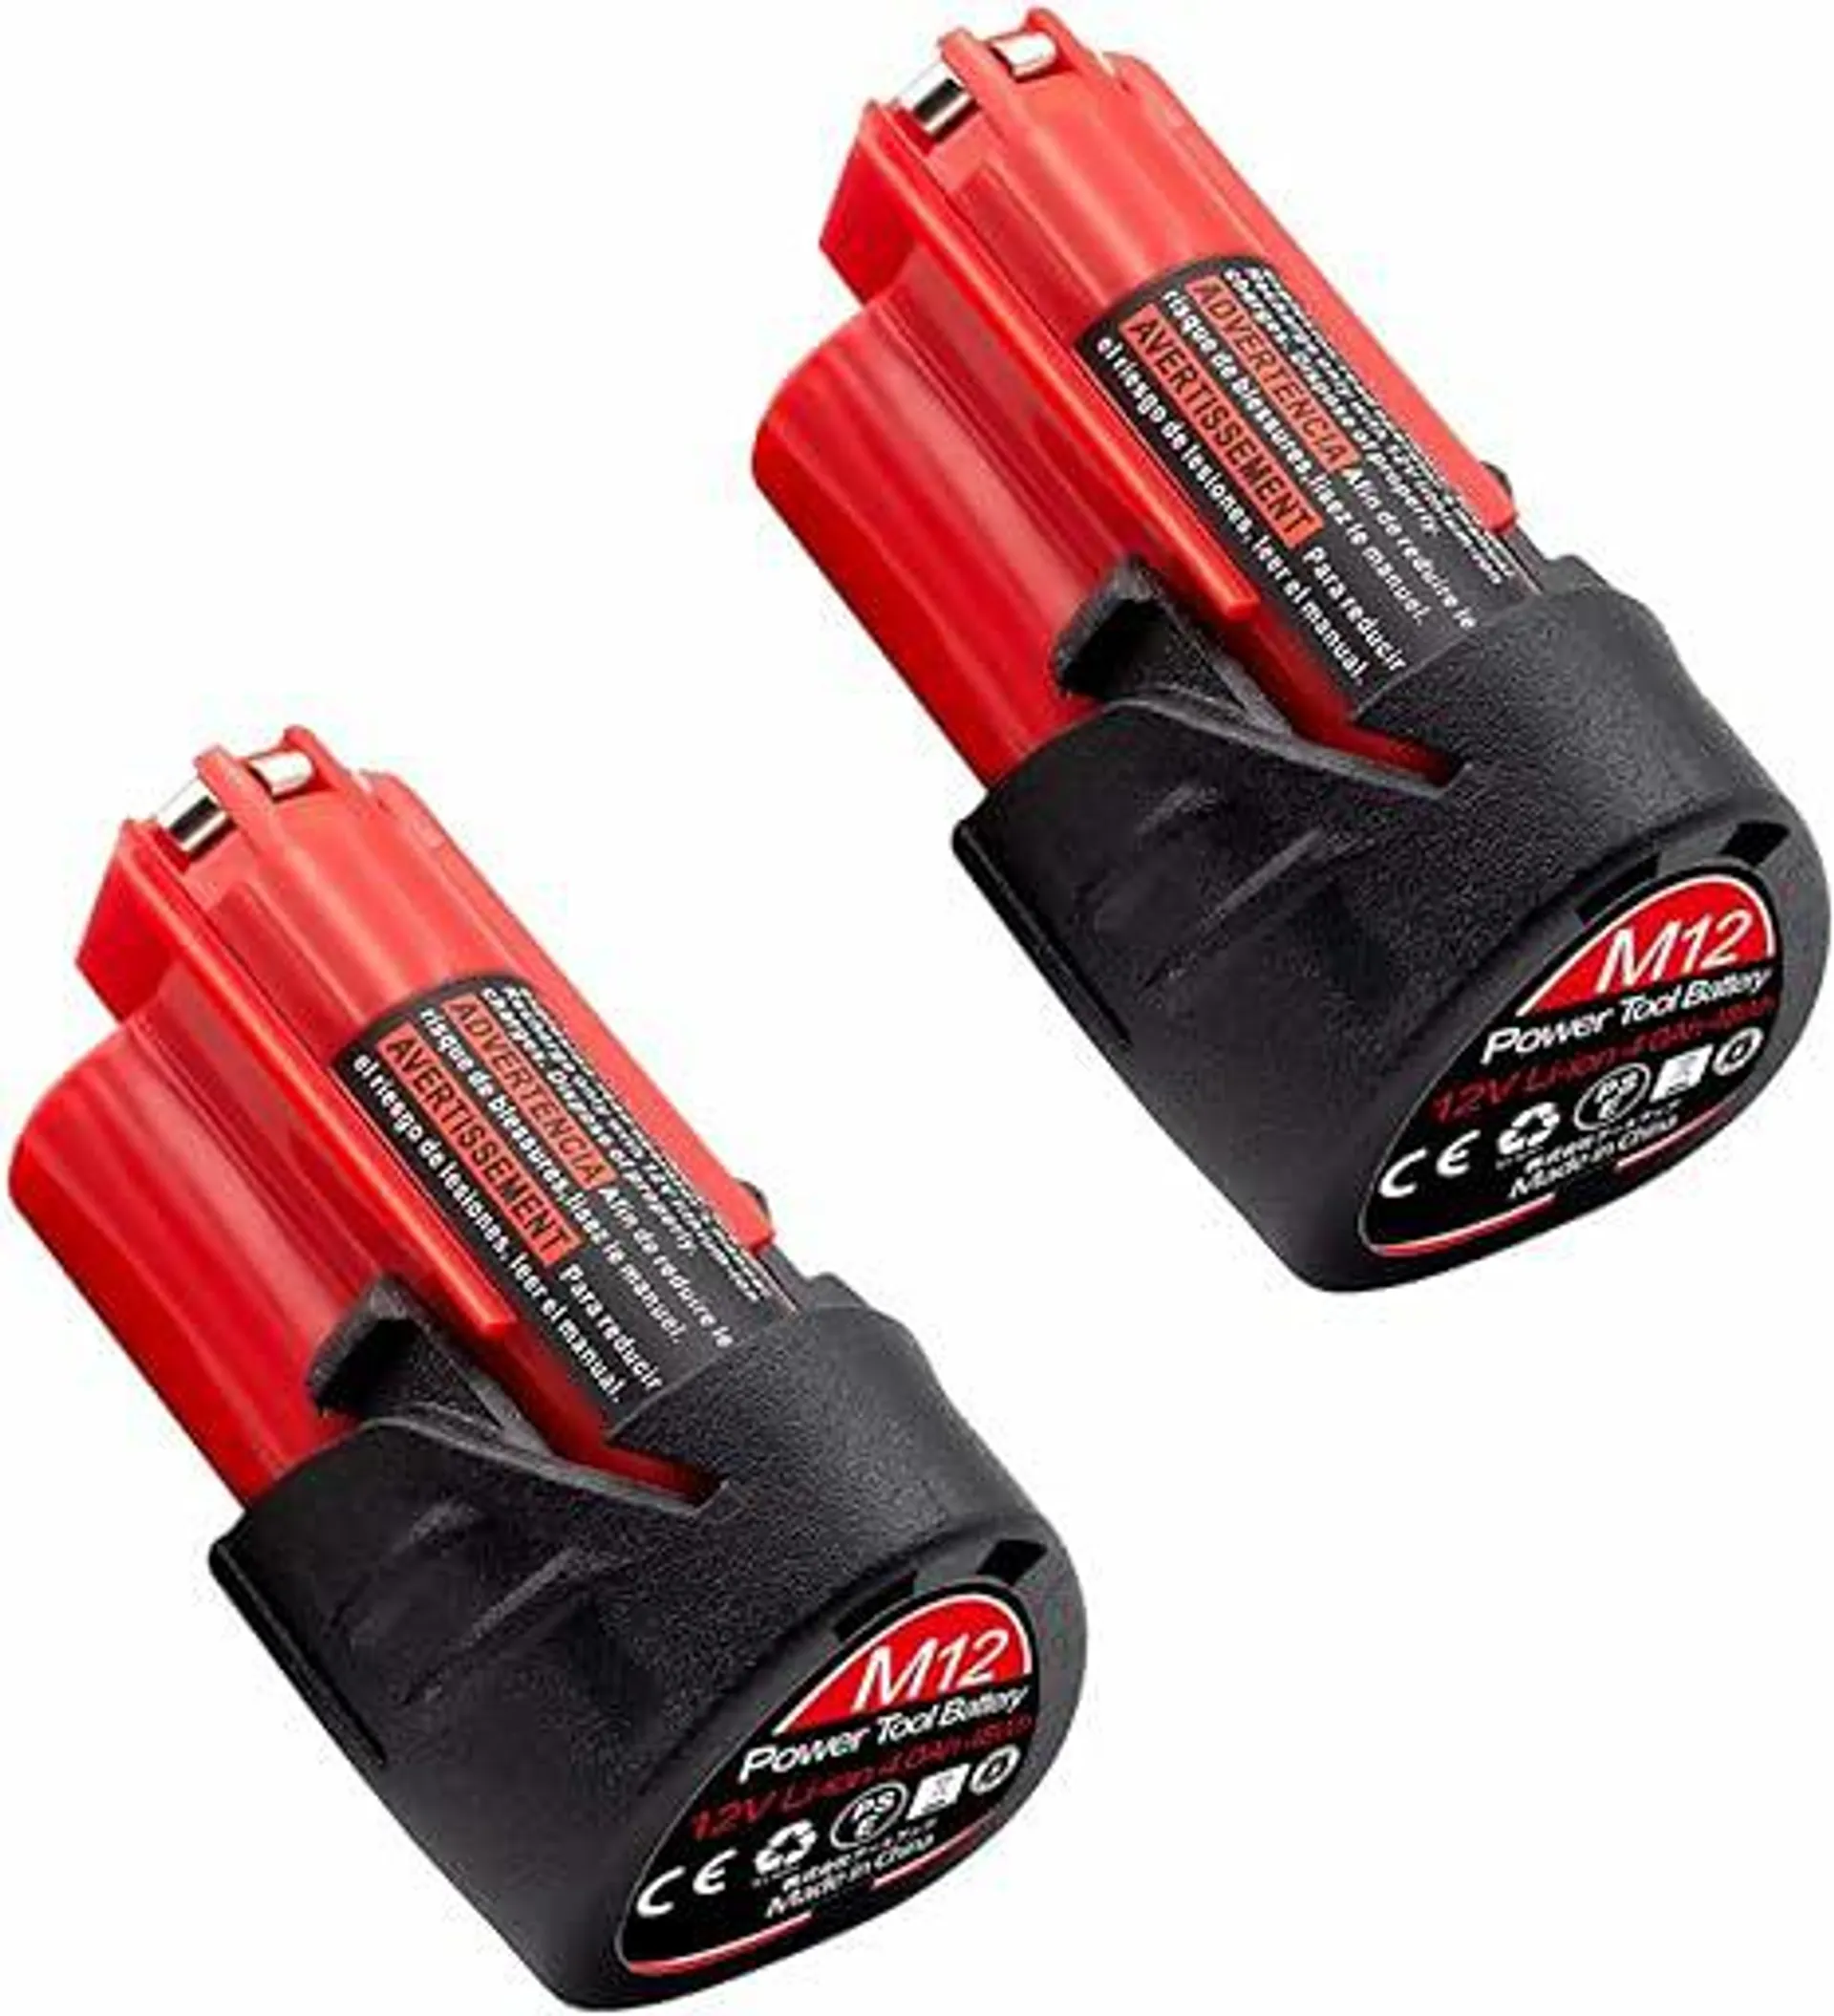 AKKOPOWER M12 Battery for Milwaukee 12v: Batteries 4.0 ah Lithium Replacement Compatible with 12 Volt Cordless Power Tools 2 Pack 48-11-2425 48-11-2440 48-11-2460 48-11-2401 48-11-2420 48-11-2411